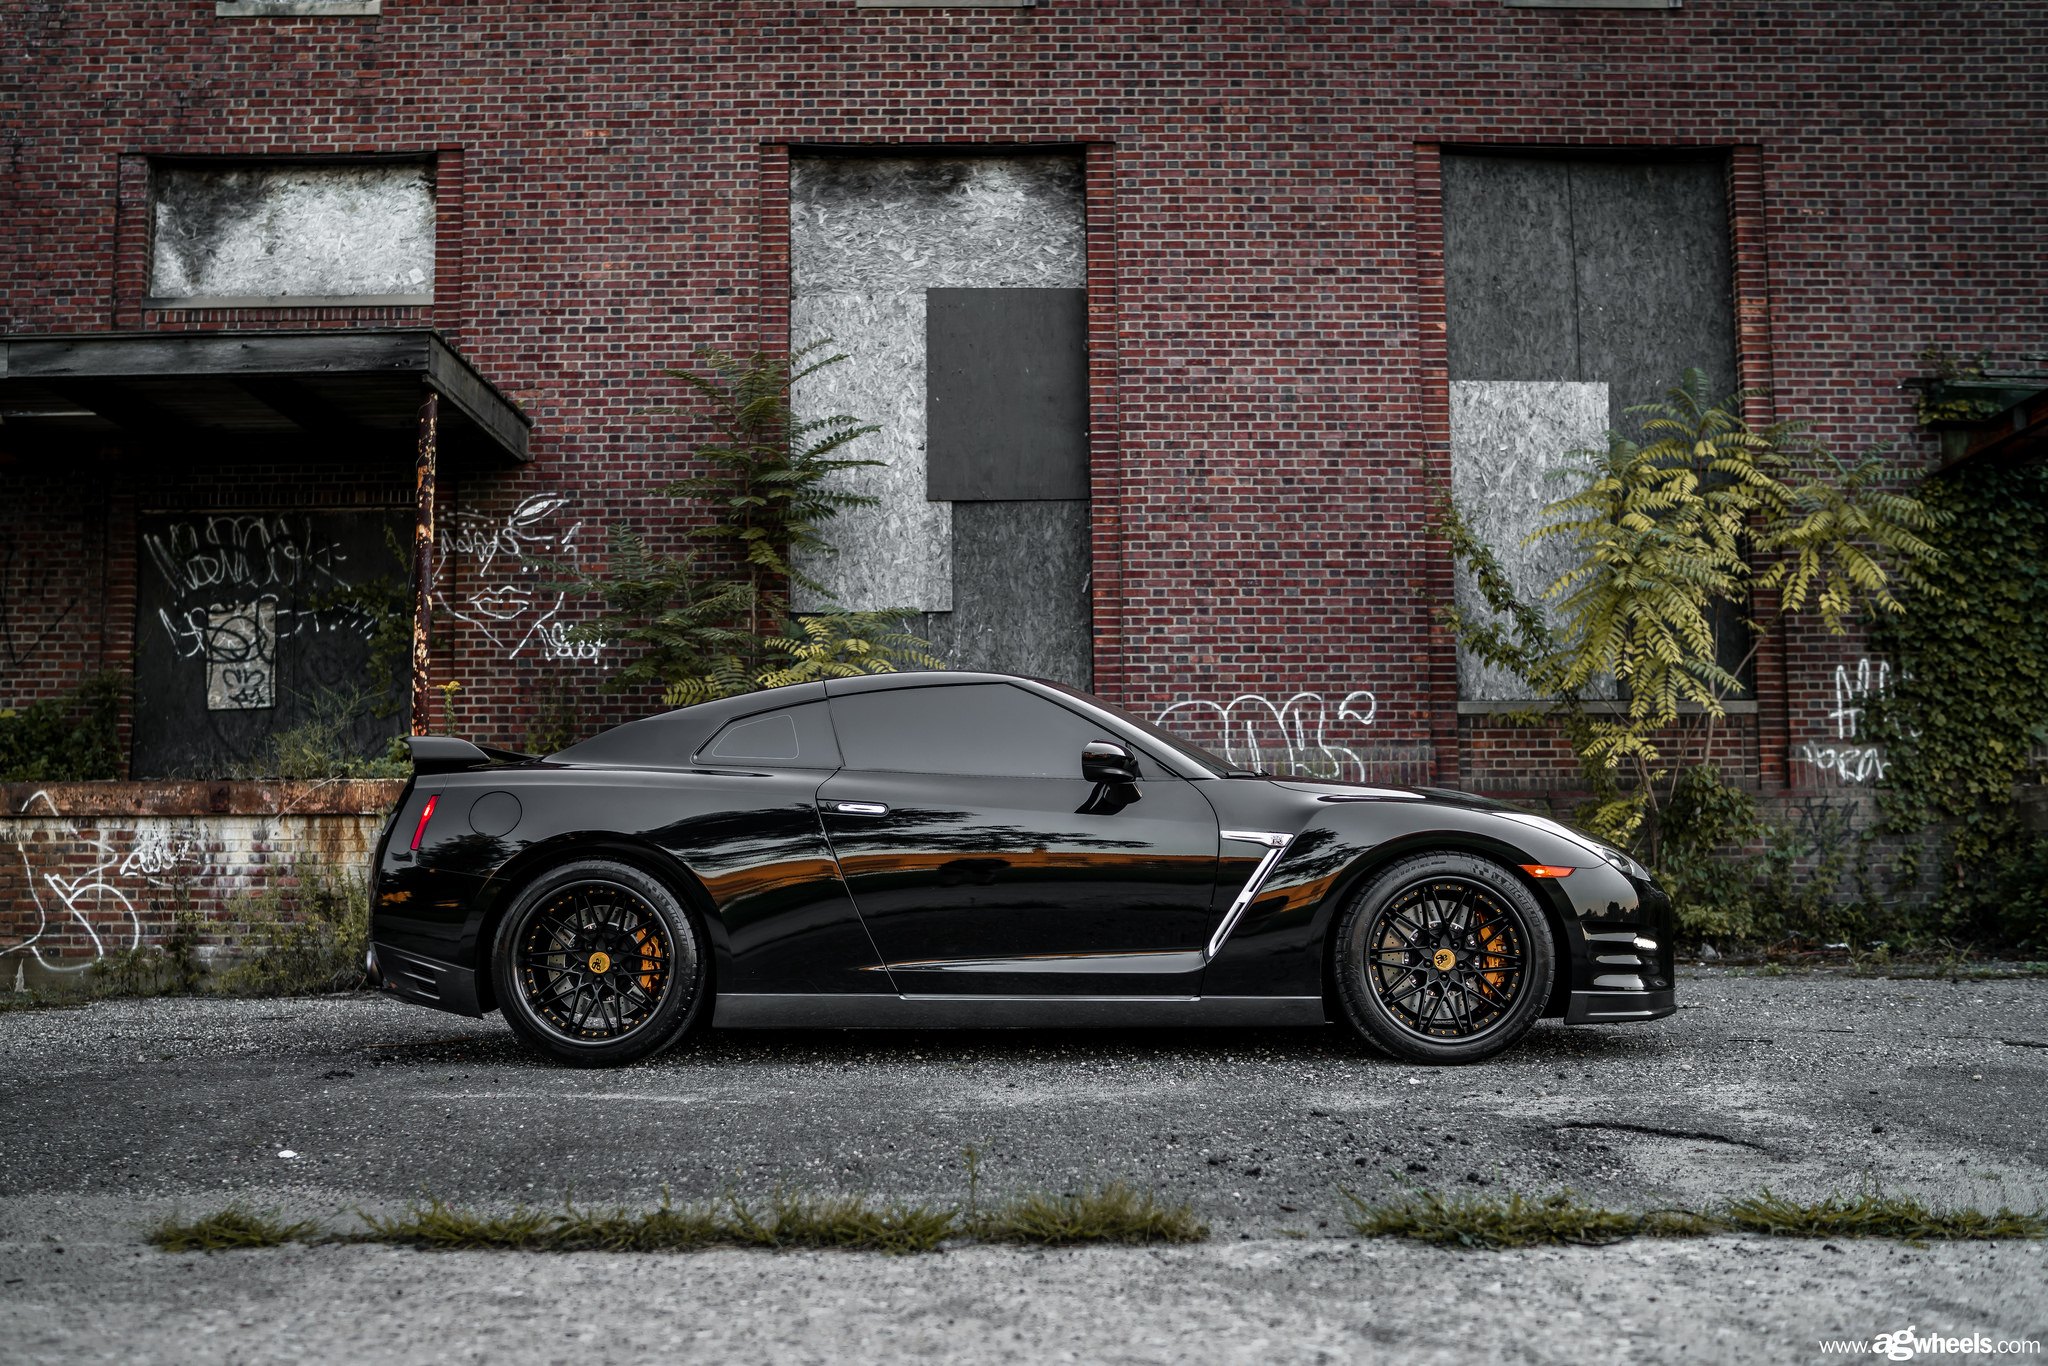 Black Nissan GT-R with Chrome Side Vents - Photo by Avant Garde Wheels